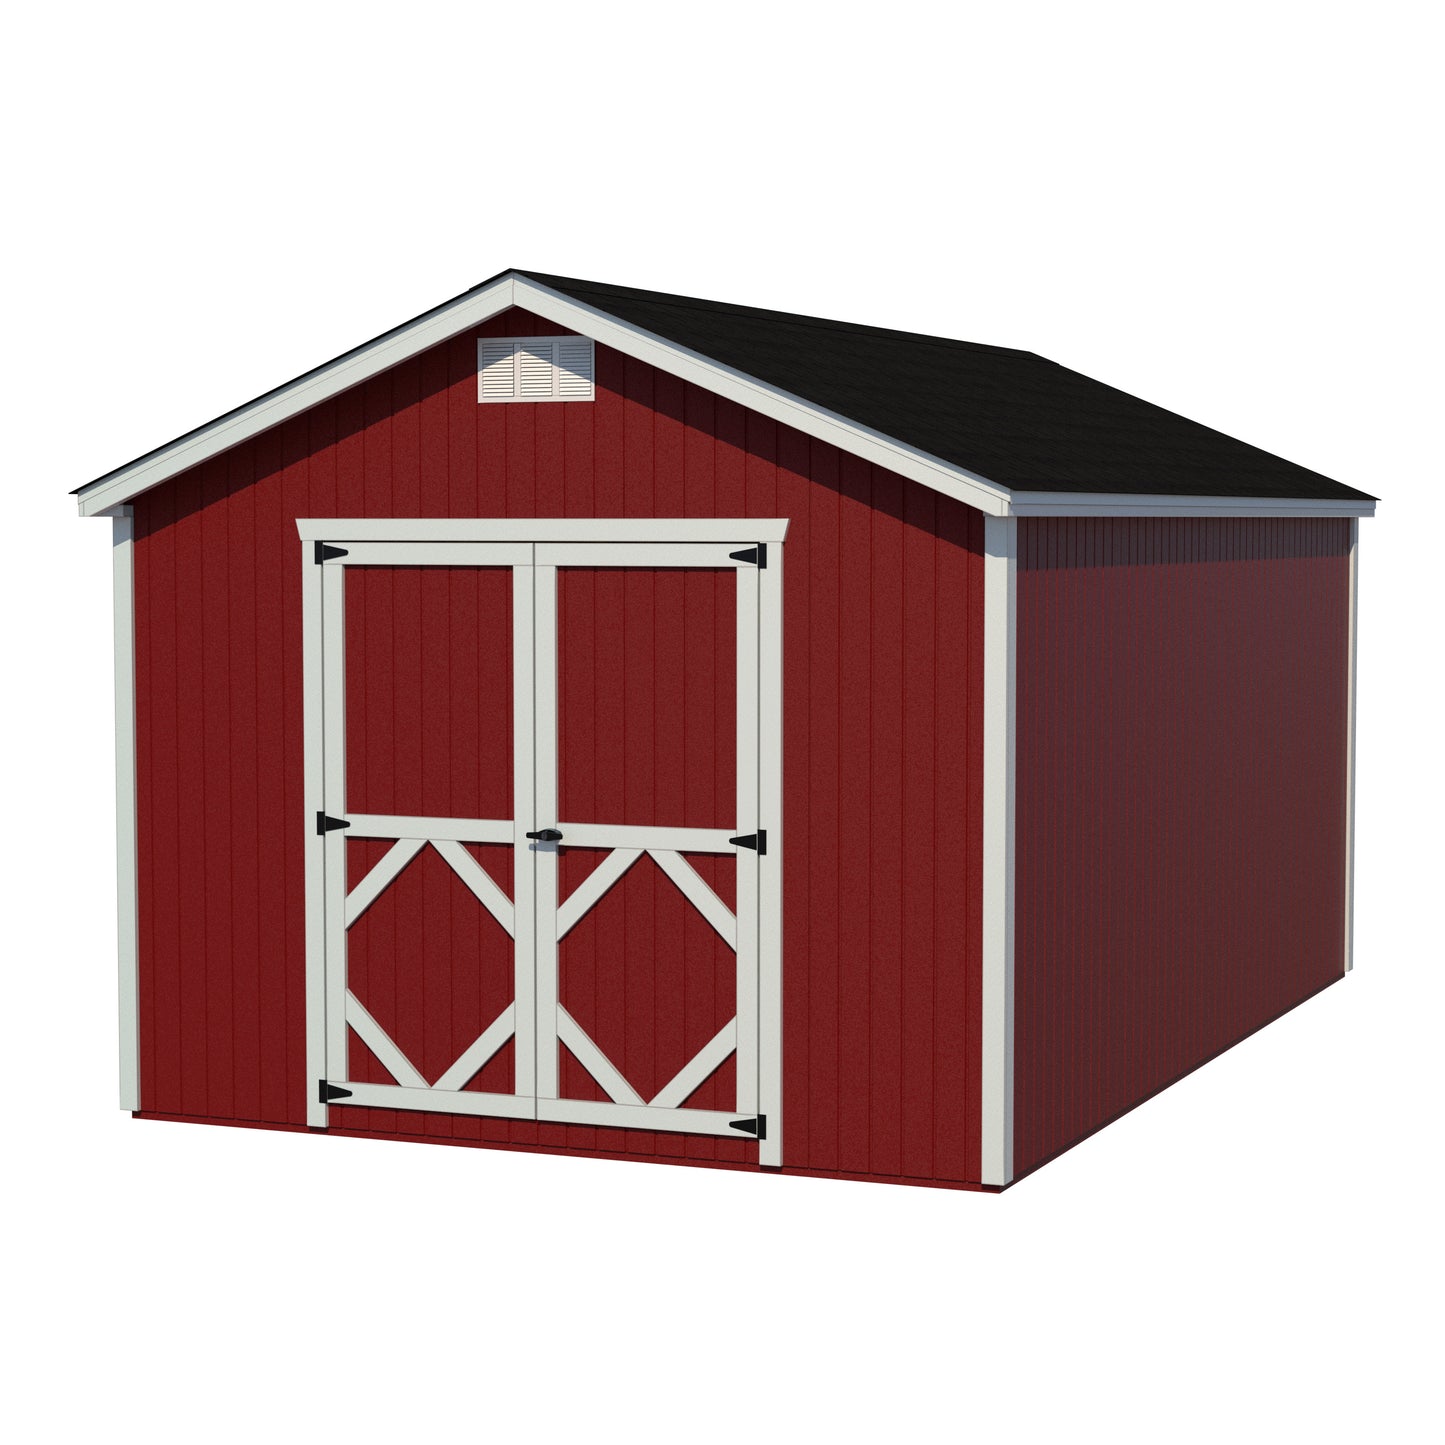 10x16 Classic gable shed in red